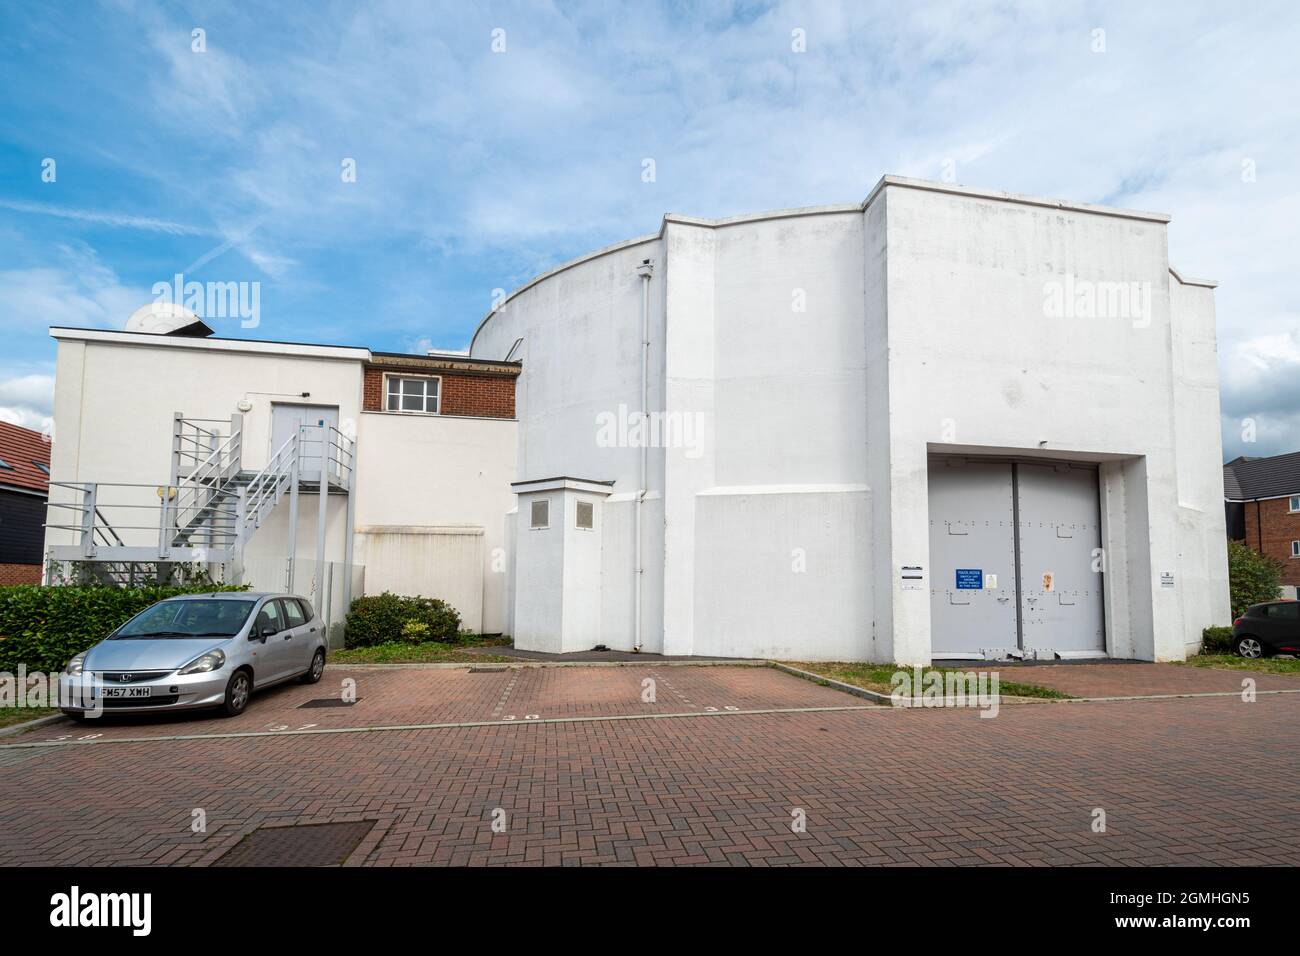 The Farnborough Centrifuge building, a man-carrying centrifuge used for research and training by the RAF Institute of Aviation Medicine, Hampshire, UK Stock Photo